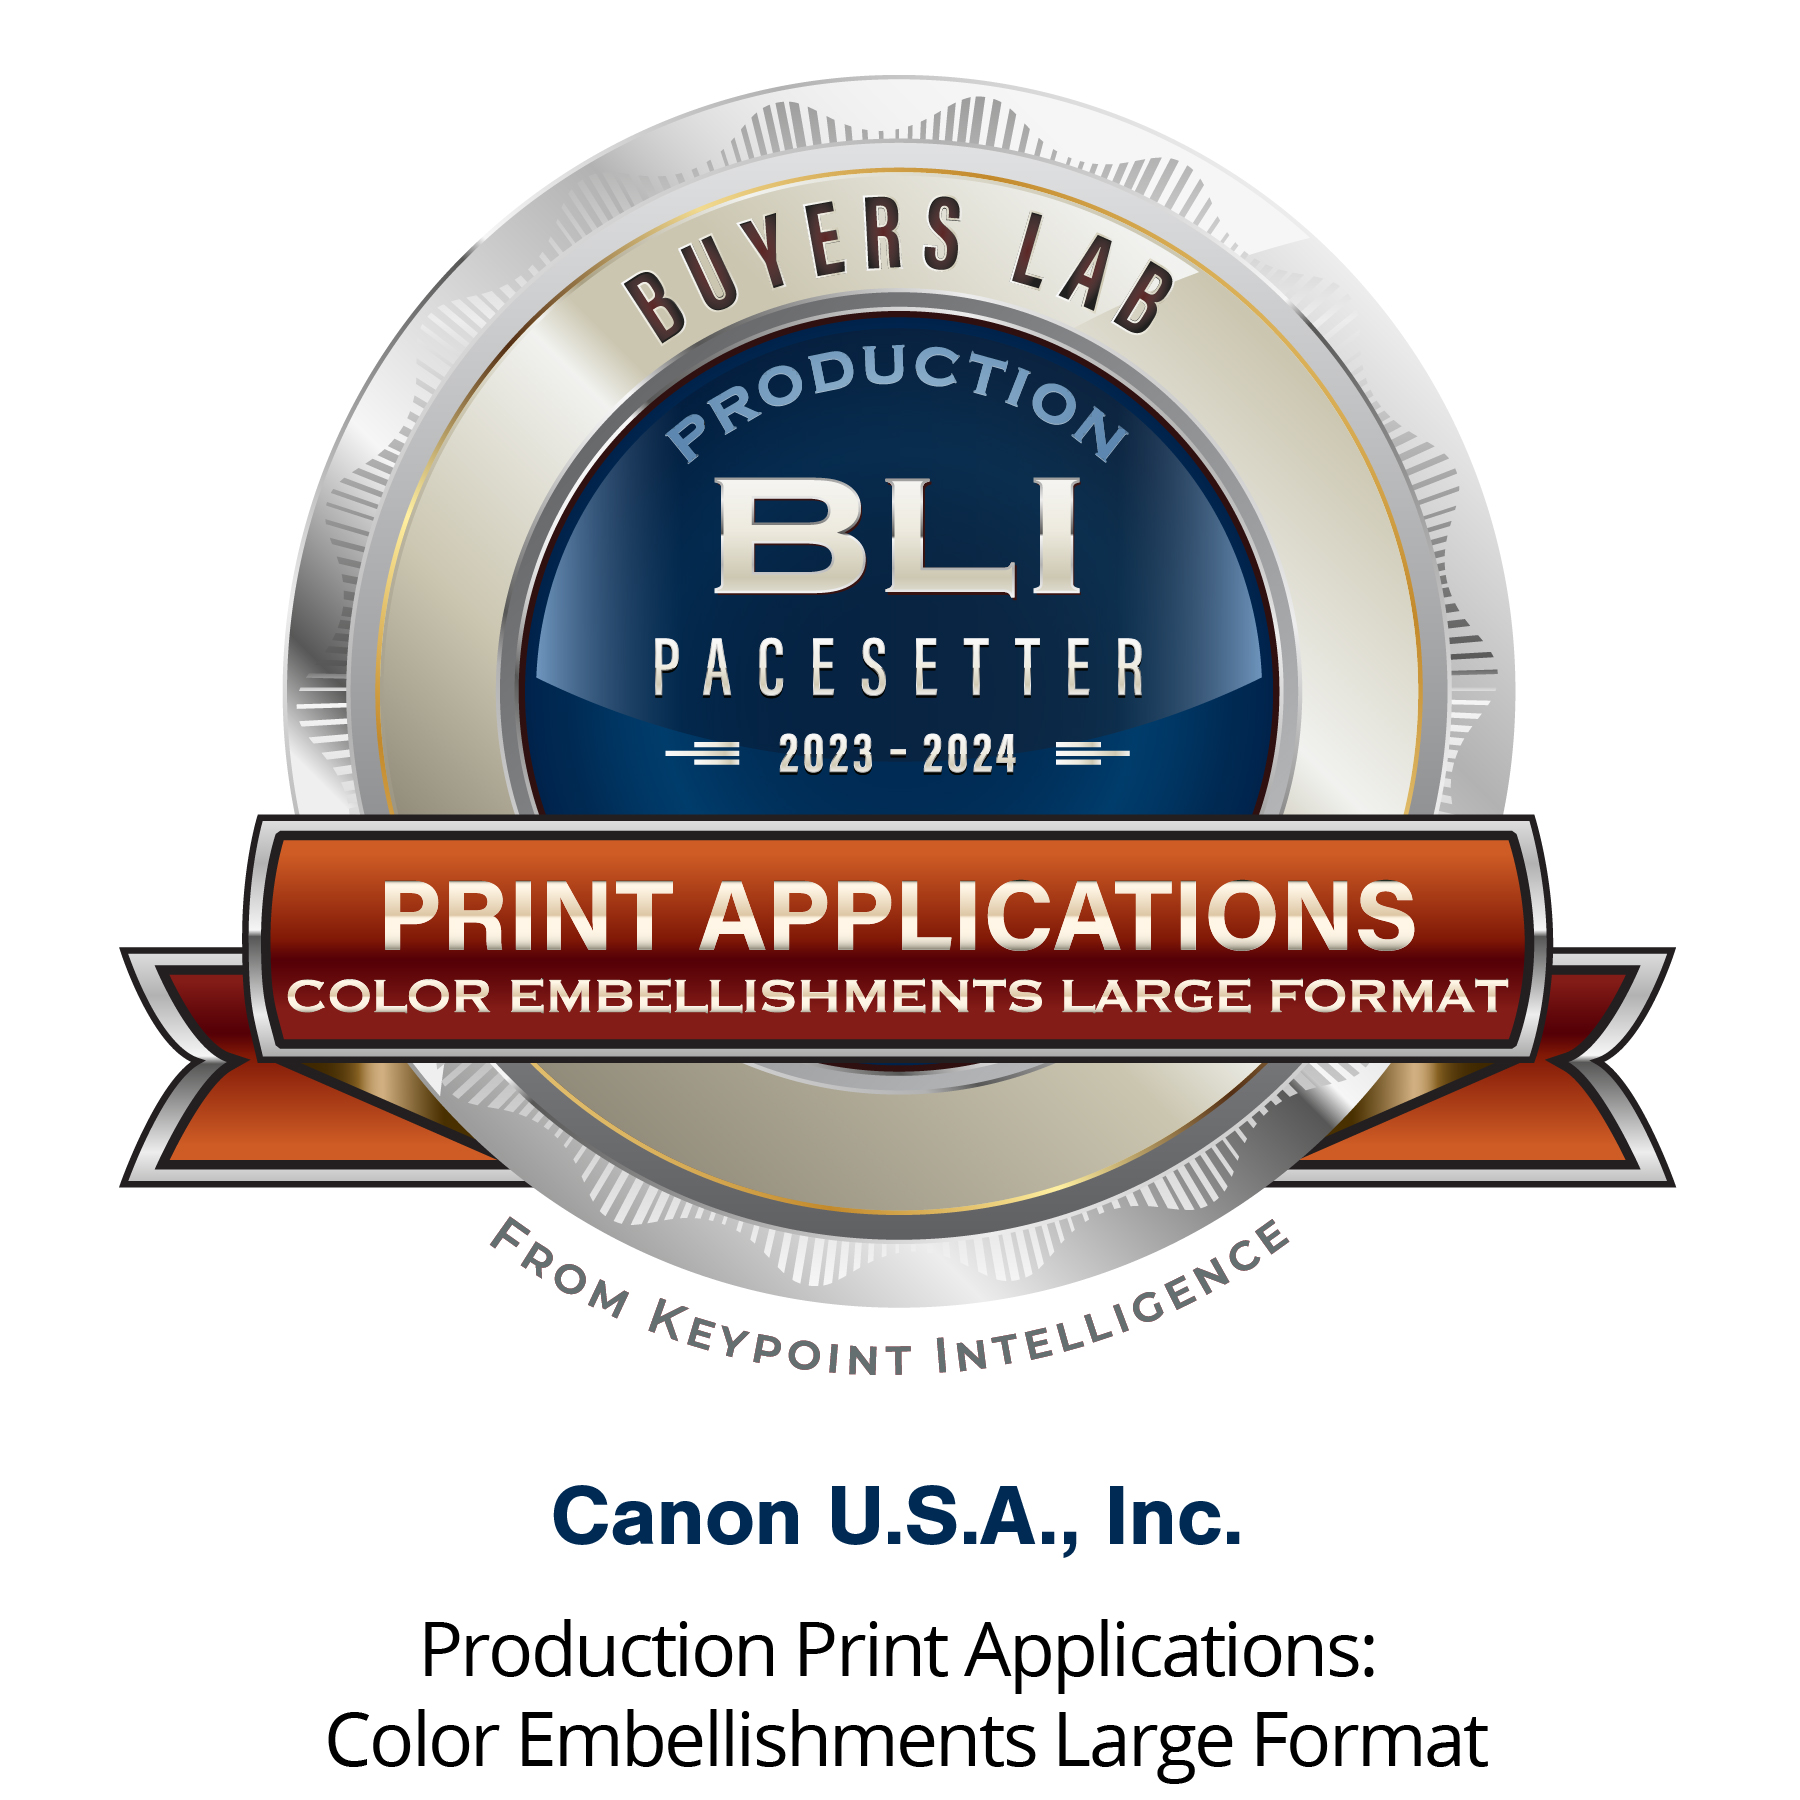 Canon awarded the Buyers Lab (BLI) 2023-2024 Pacesetter Award in Production Print Applications: Color Embellishments Large Format